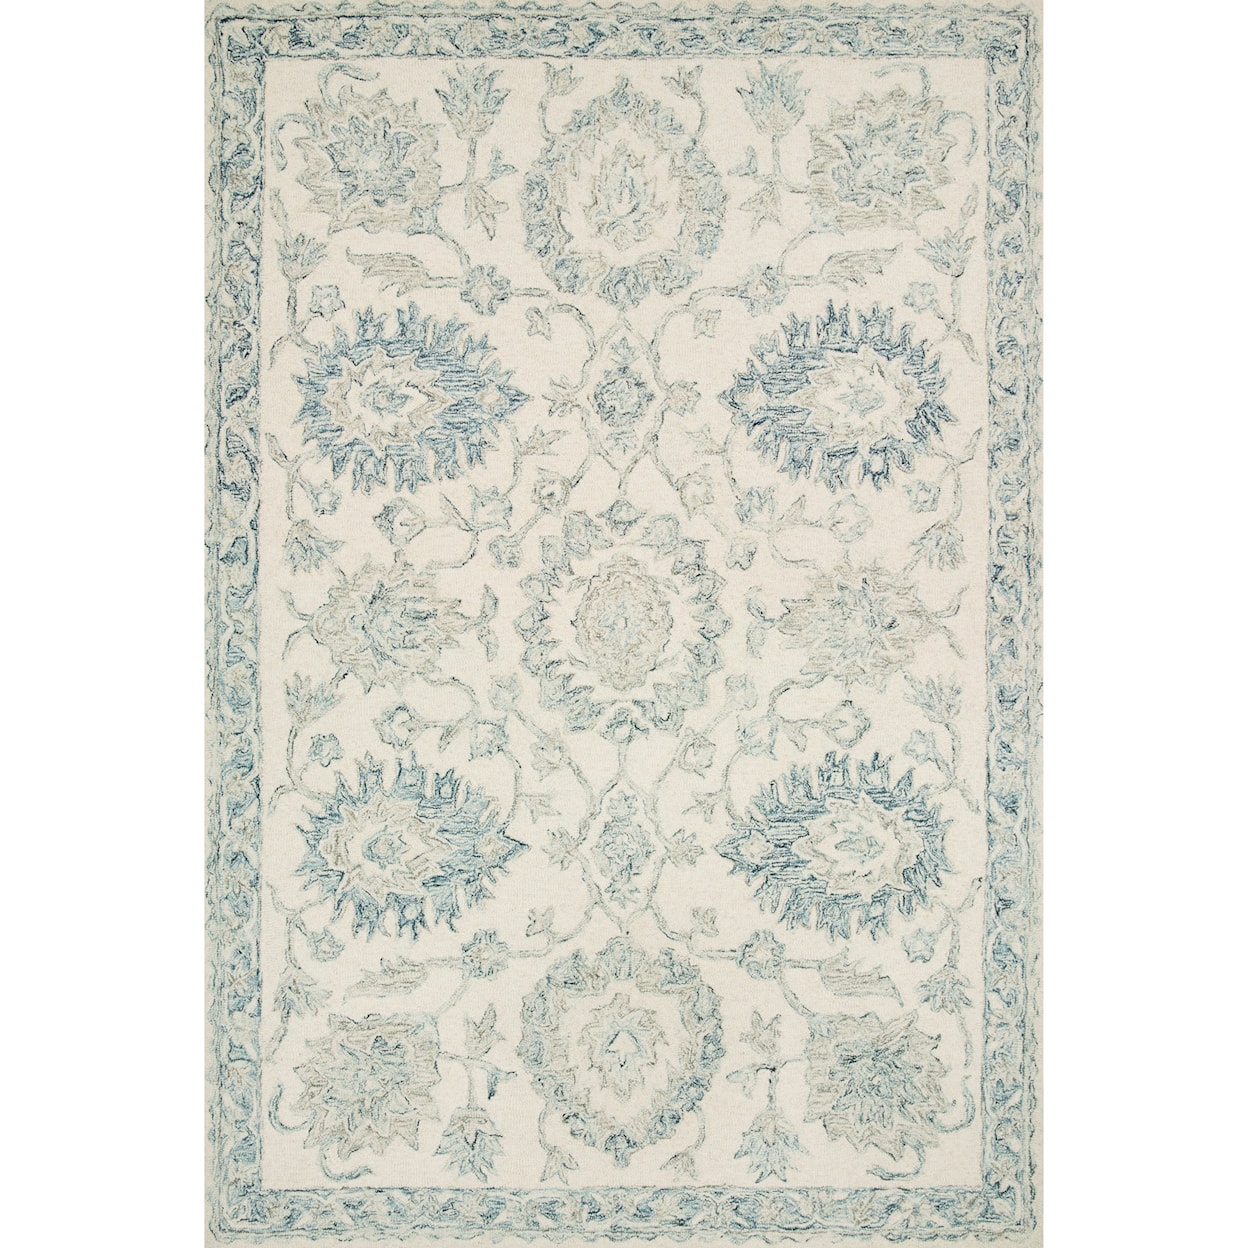 Loloi Rugs Norabel 9'3" x 13' Ivory / Blue Rug